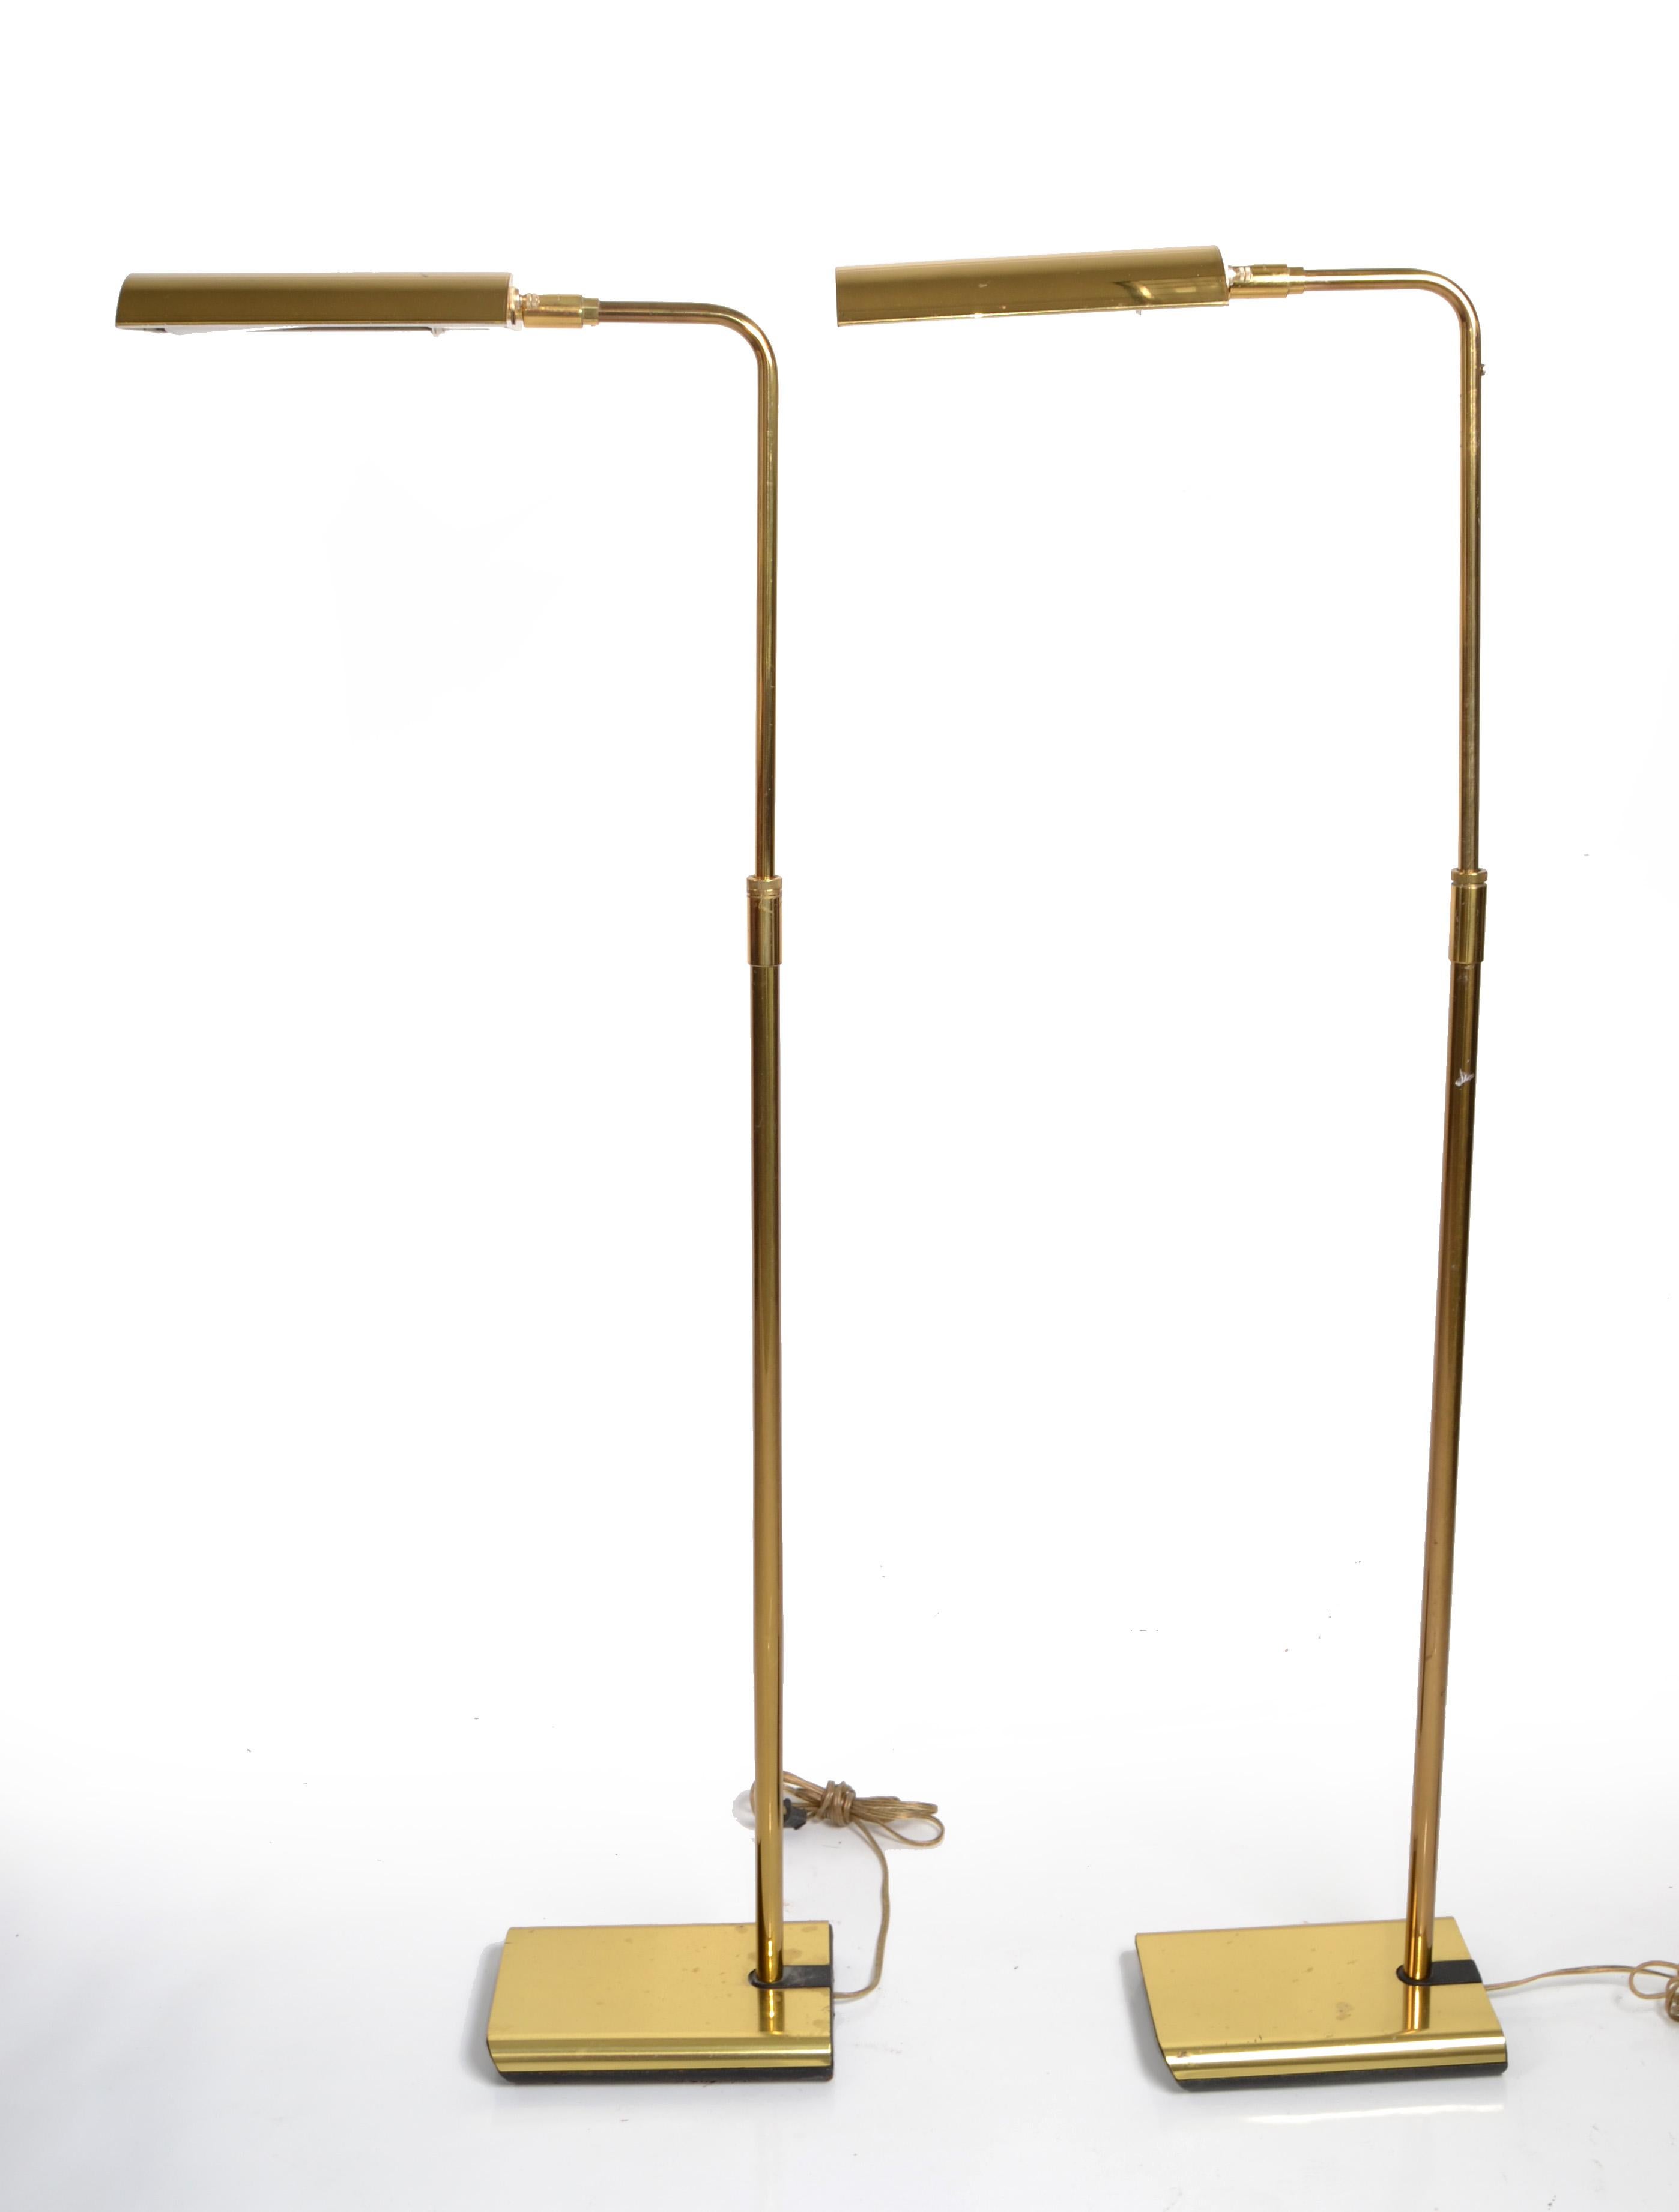 Pair of Mid-Century Modern Brass Floor lamps were made by the esteemed American Company Koch & Lowy, that designed all forms of lighting, from table to floor lamps, and chandeliers. 
It is best known and recognized by these floor lamps, that came in